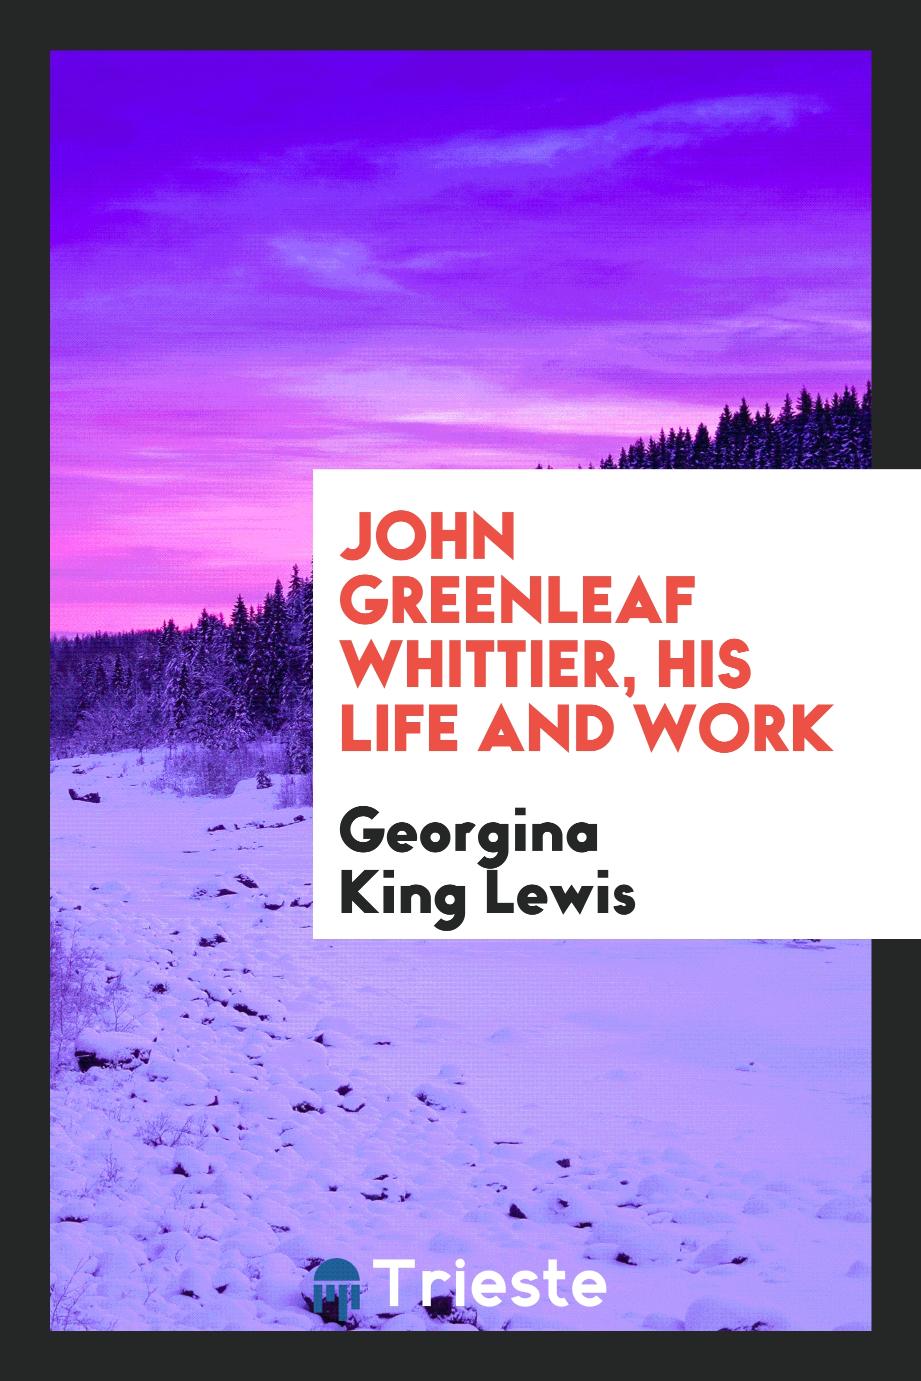 John Greenleaf Whittier, his life and work